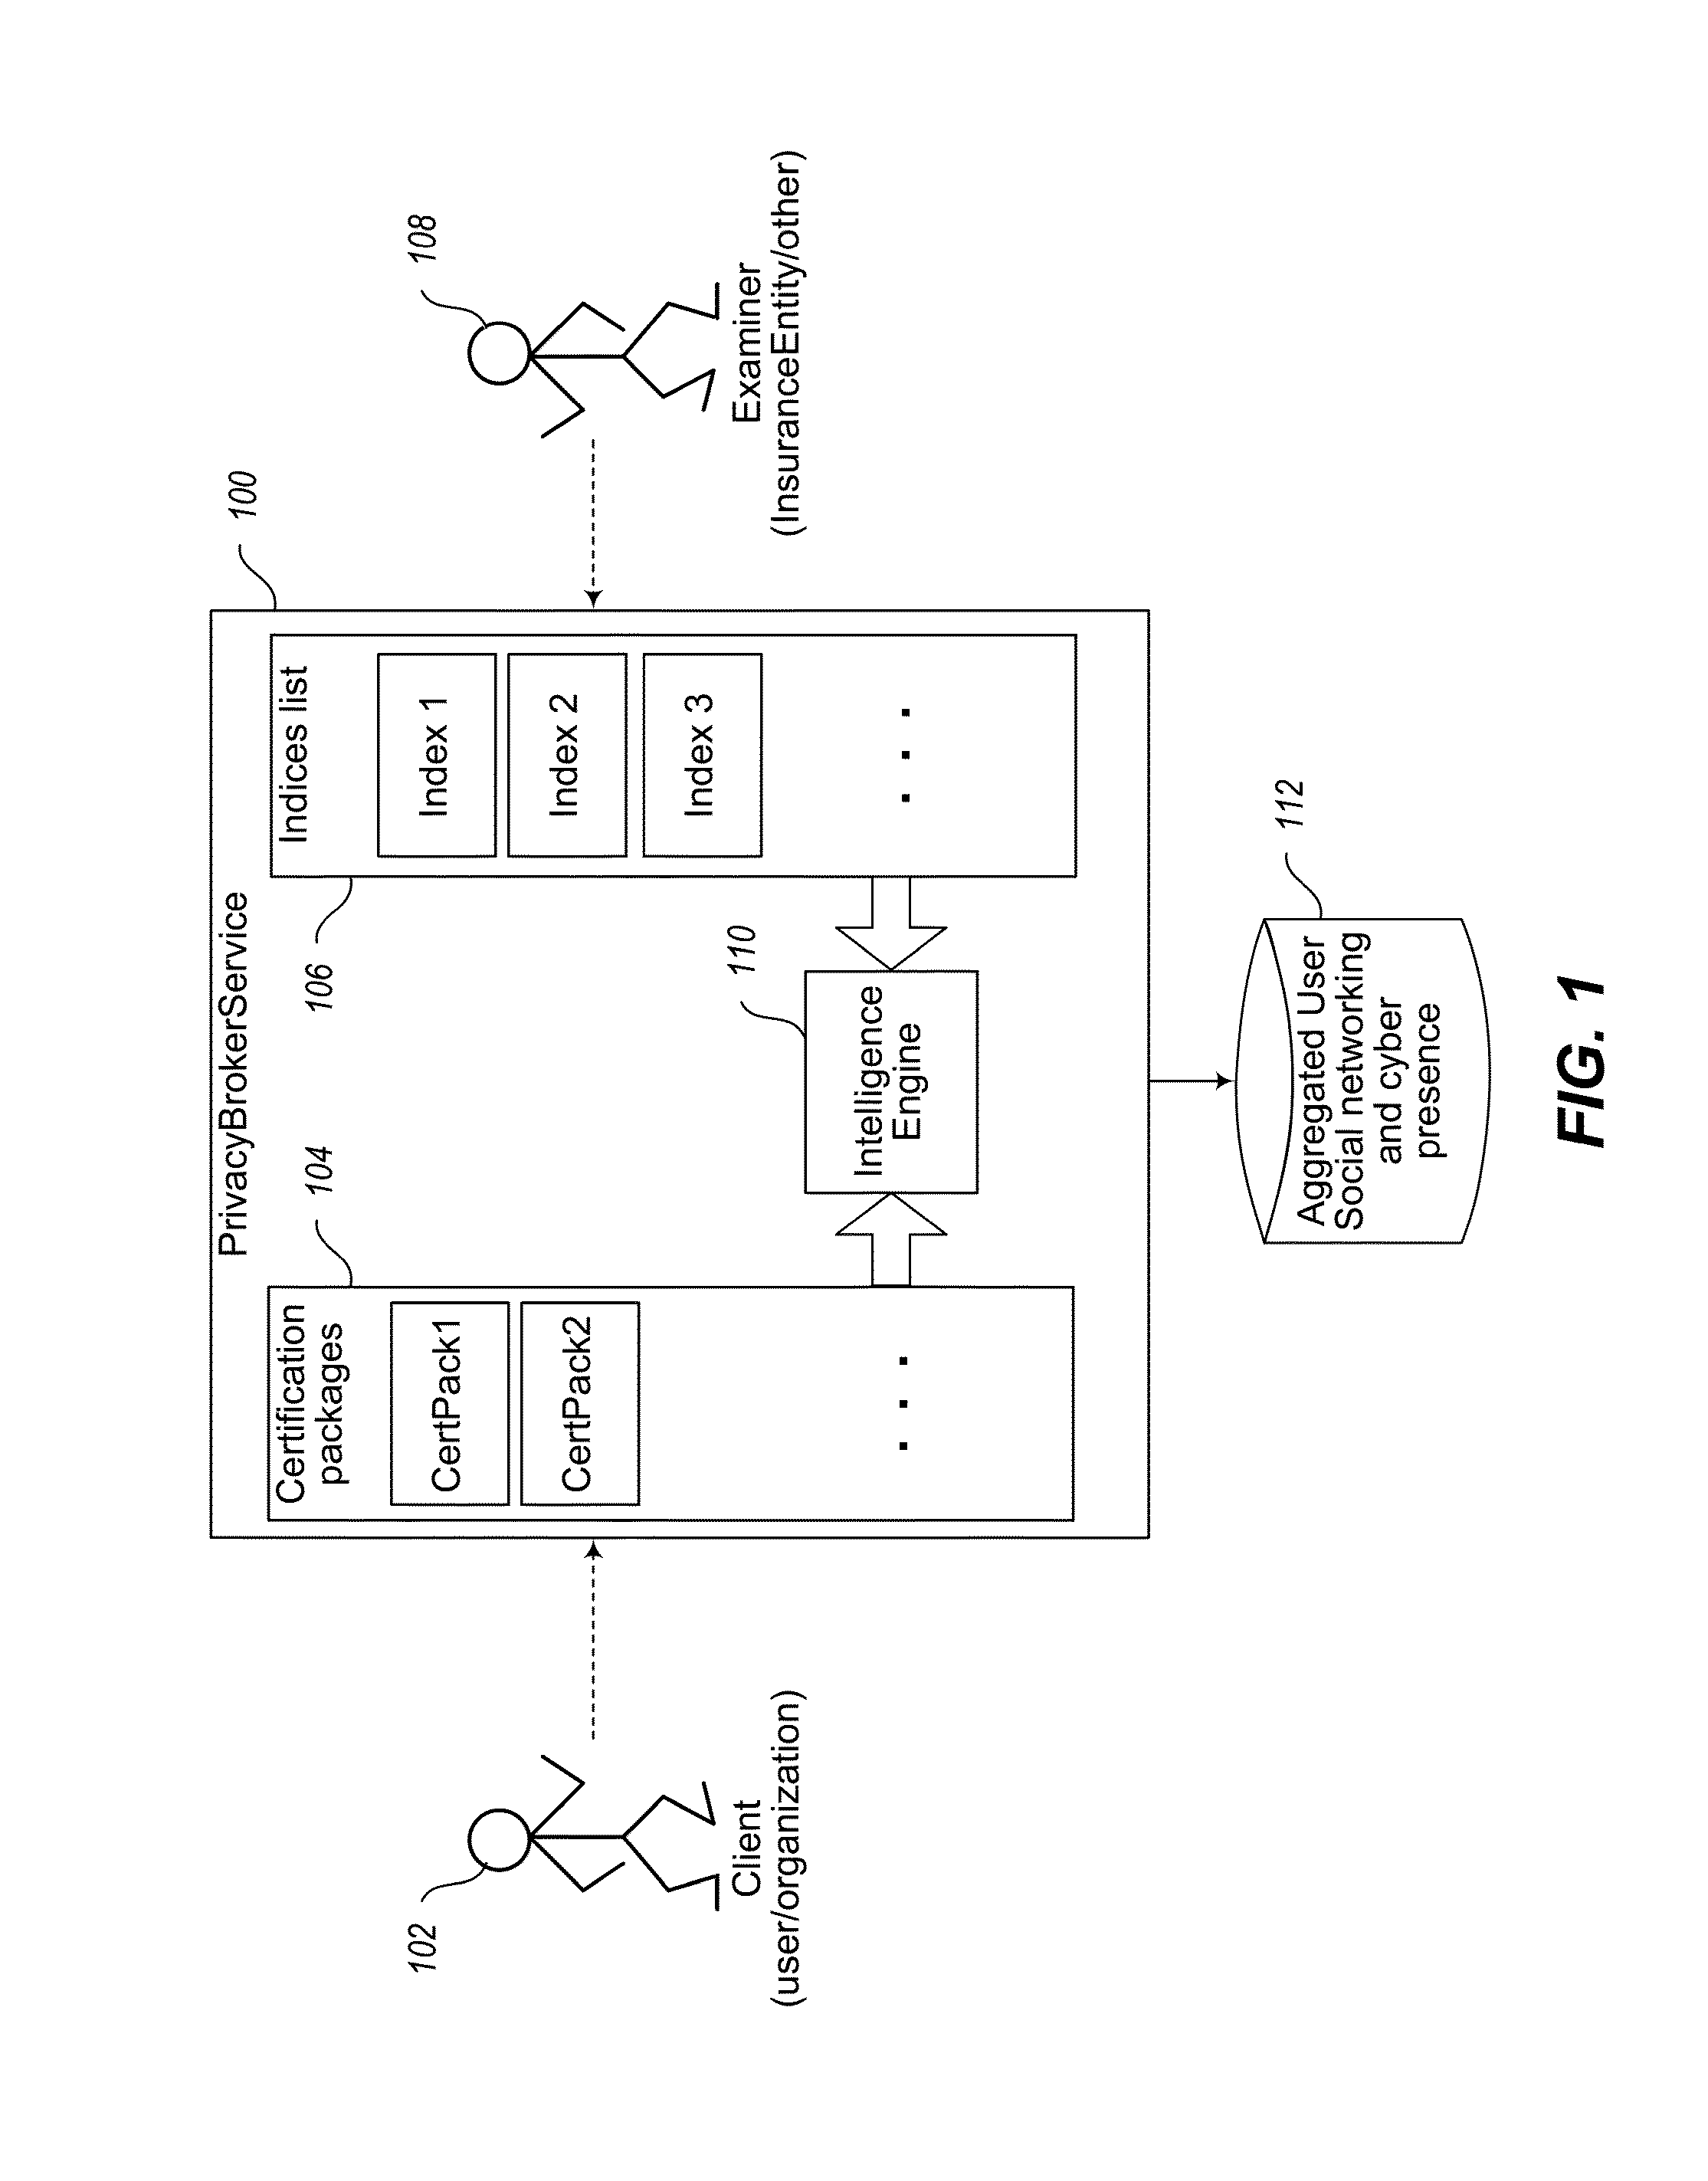 Method and system of assessing risk associated with users based at least in part on online presence of the user